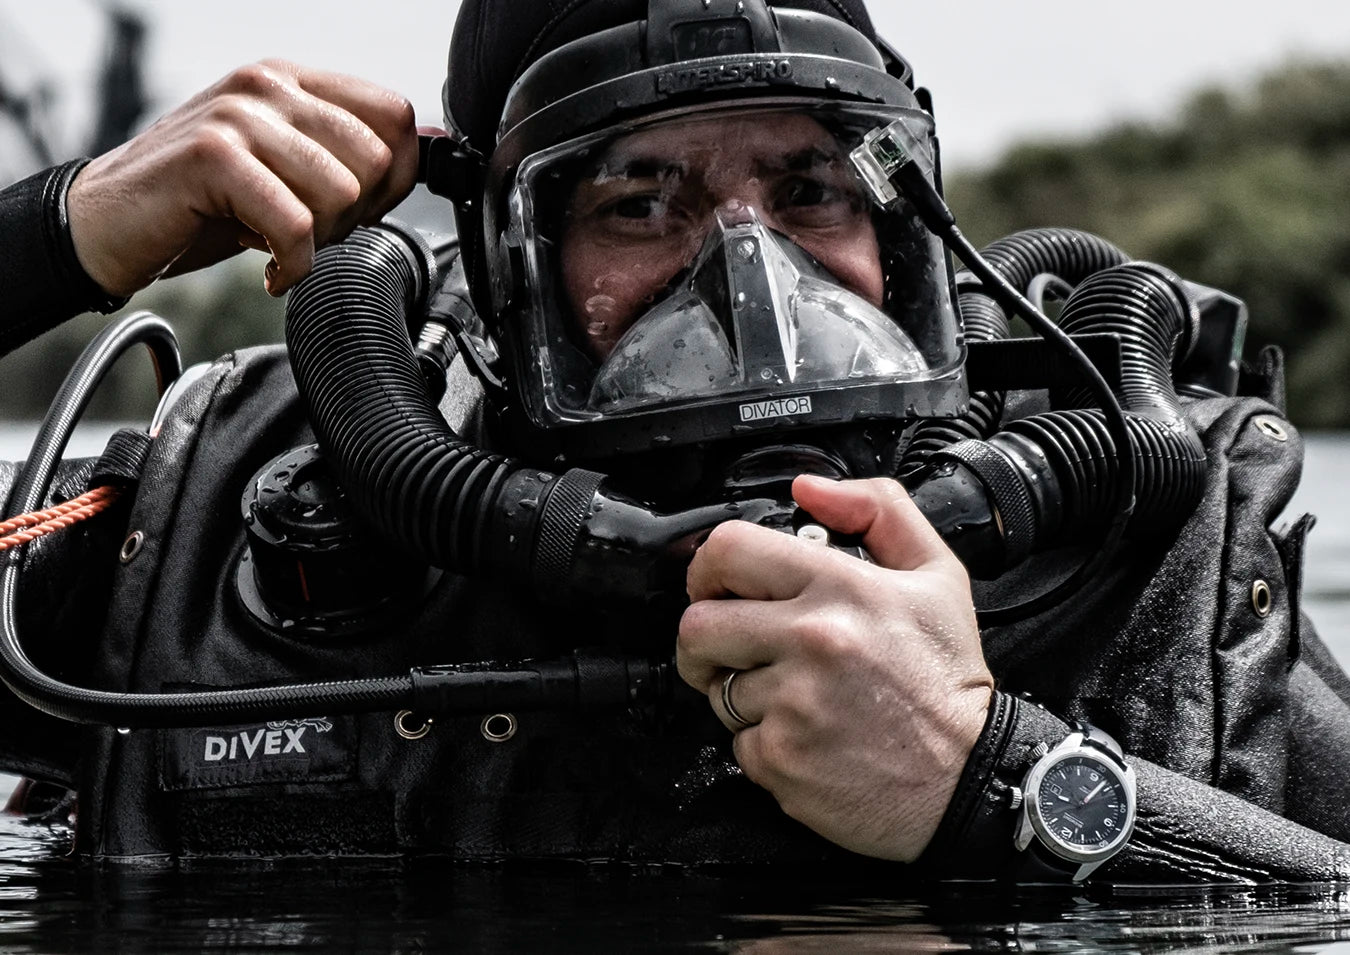 Tried and tested by Royal Navy Clearance Divers.